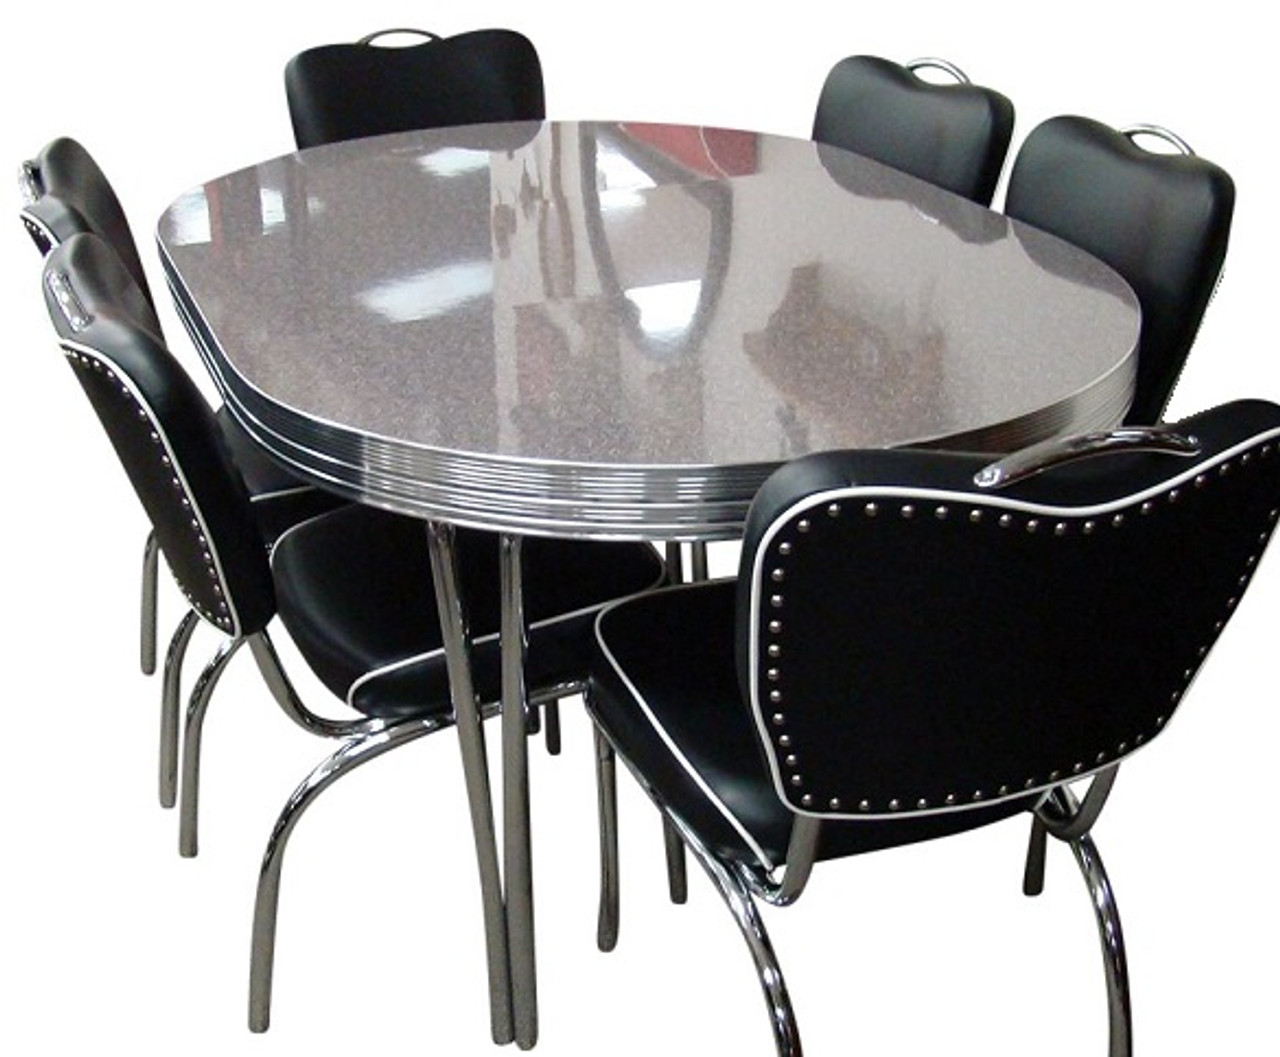 Black & White Highback Dining Chairs with Metal, 1930s, Set of 6 for sale  at Pamono